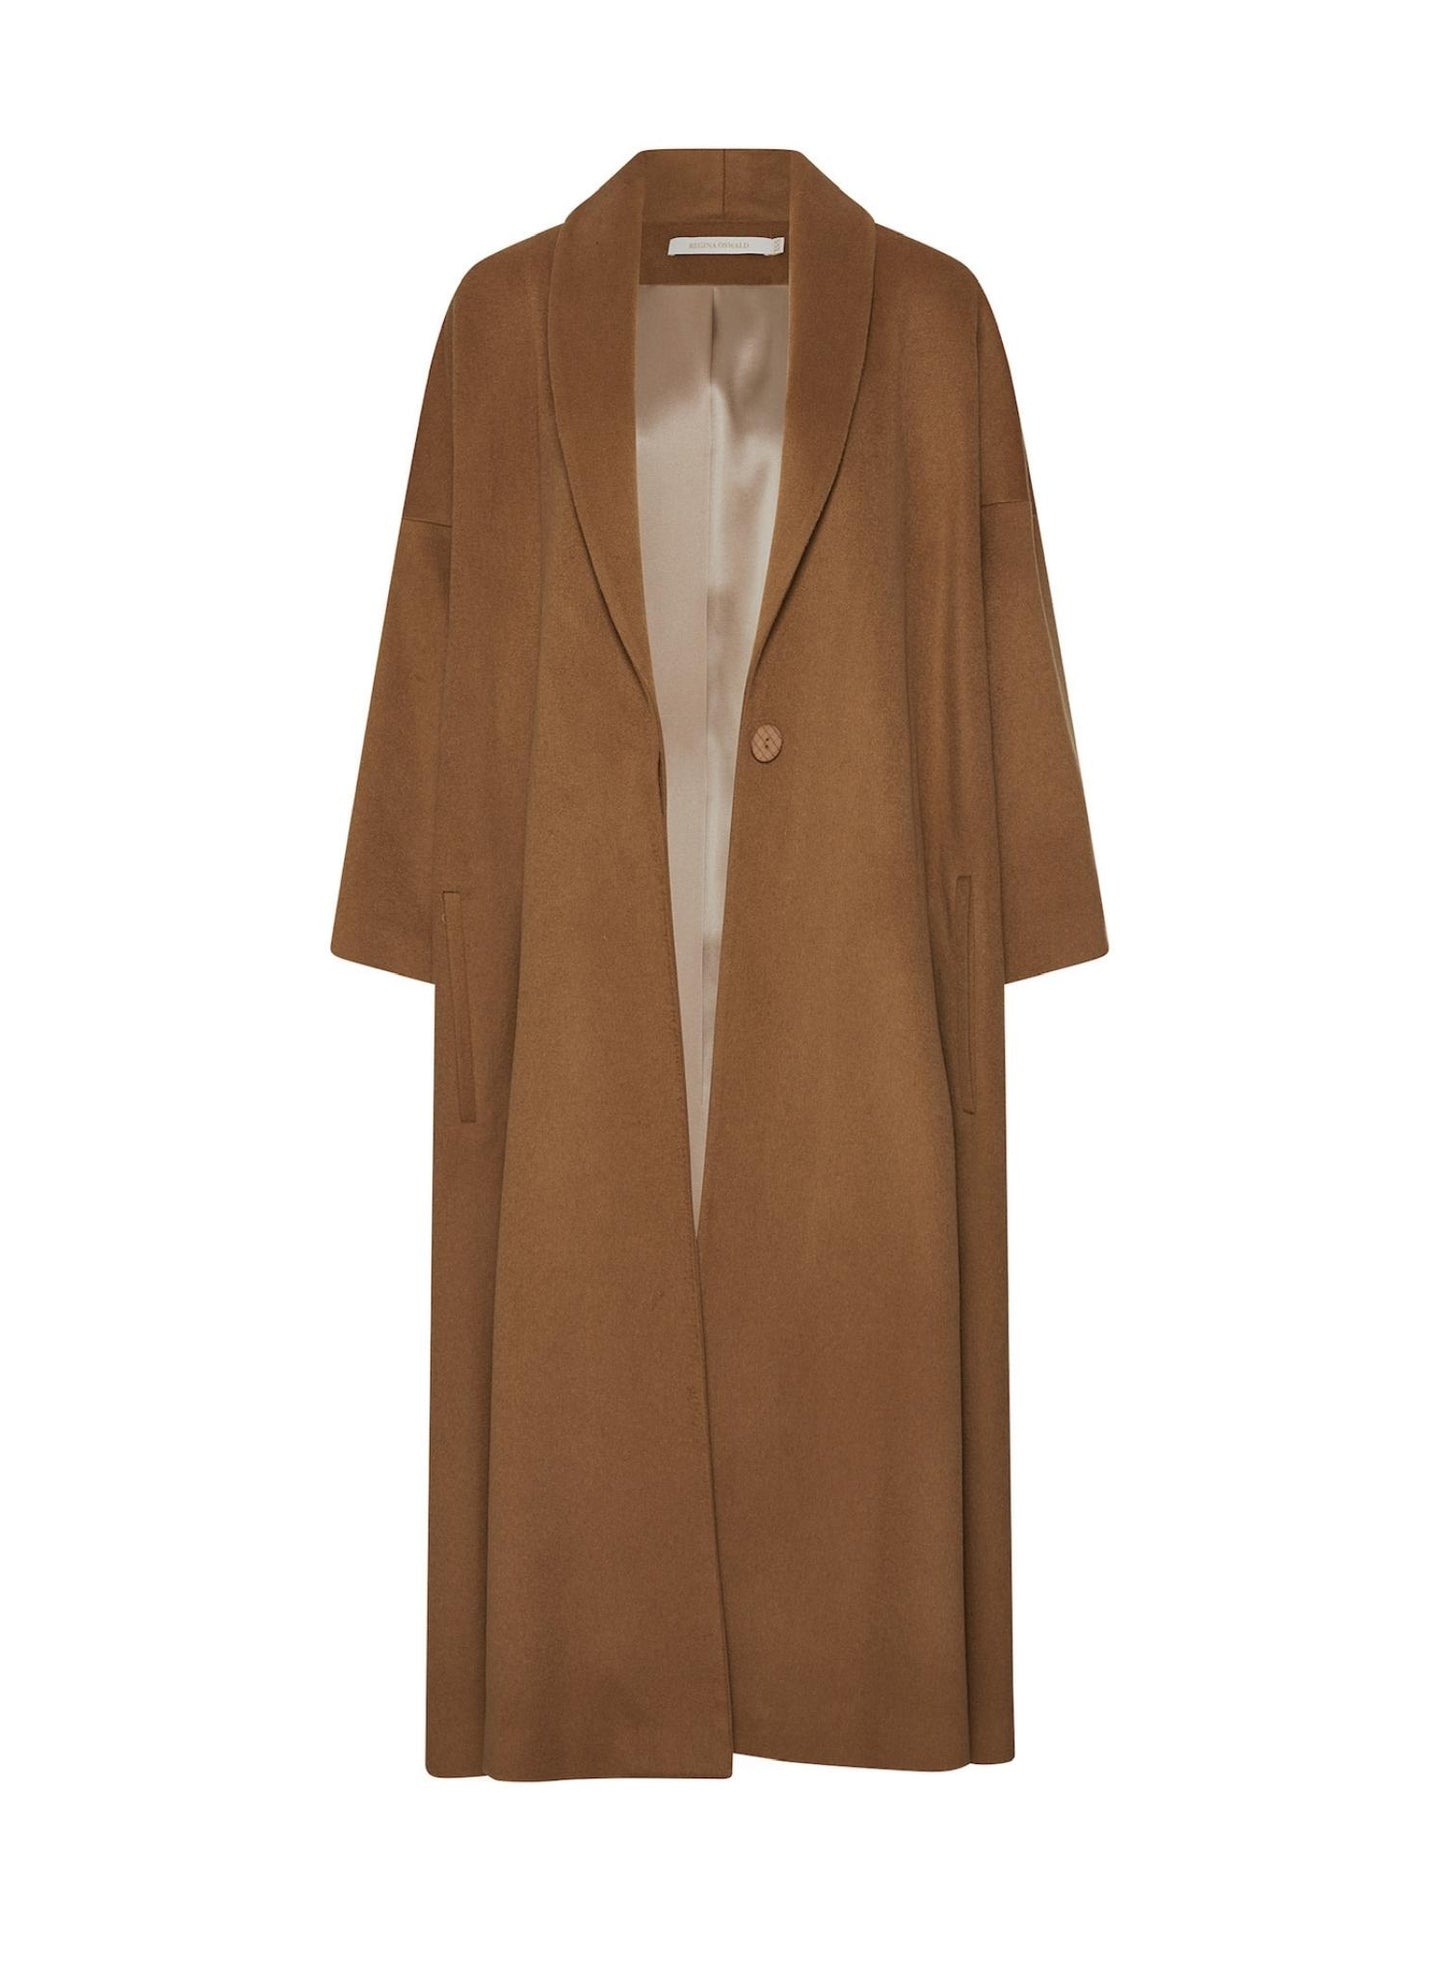 Womens Camel Brown Long Coat with Belt